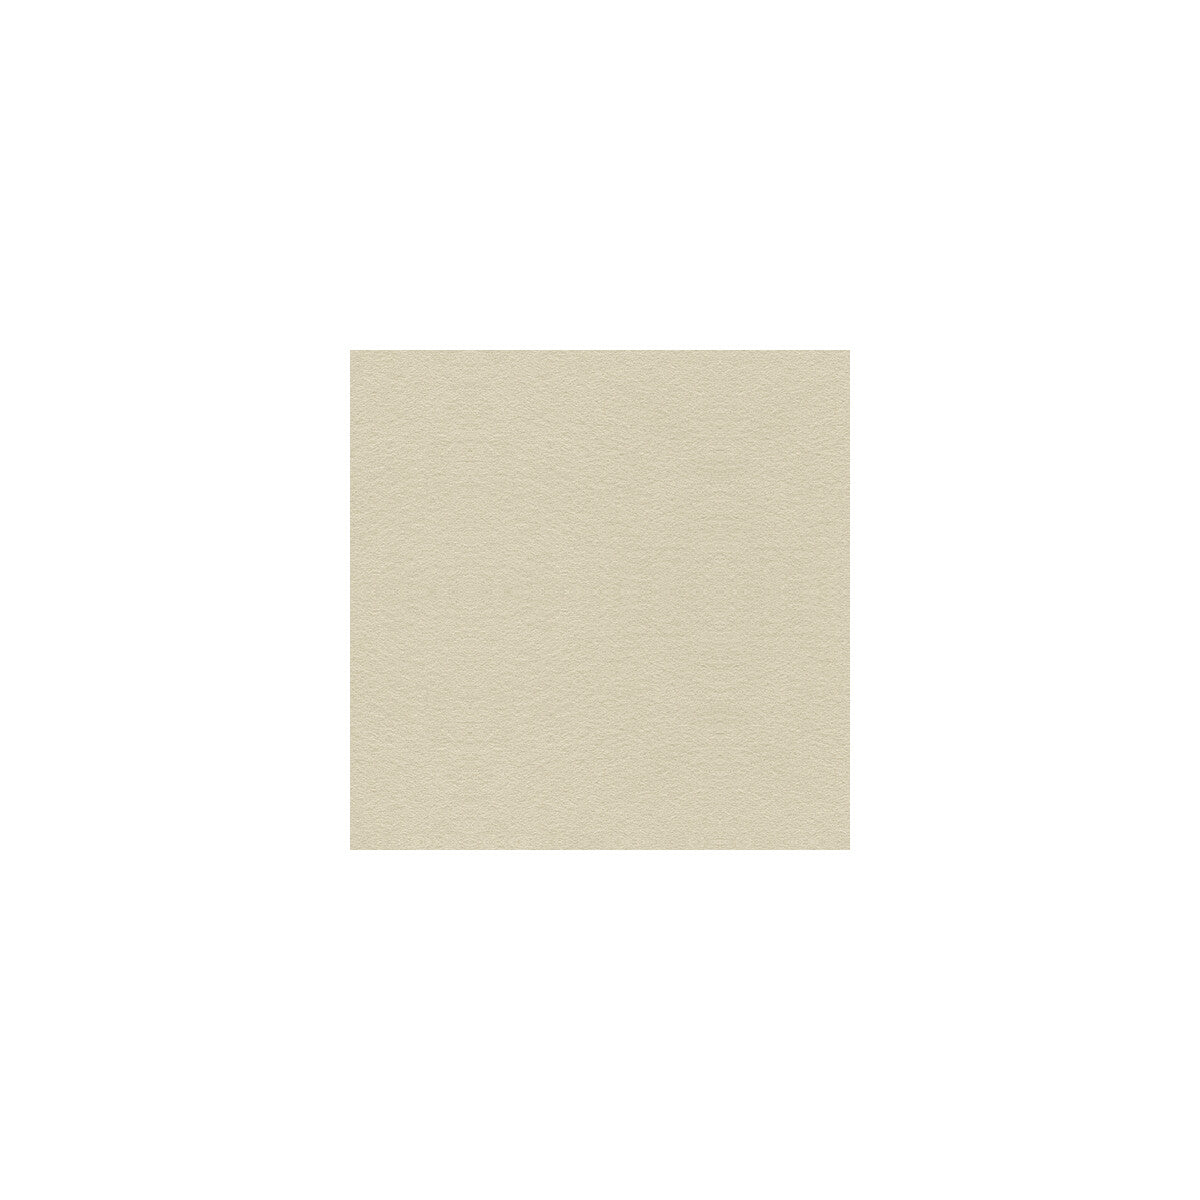 Ultimate fabric in dove color - pattern 960122.611.0 - by Lee Jofa in the Ultimate Suede collection